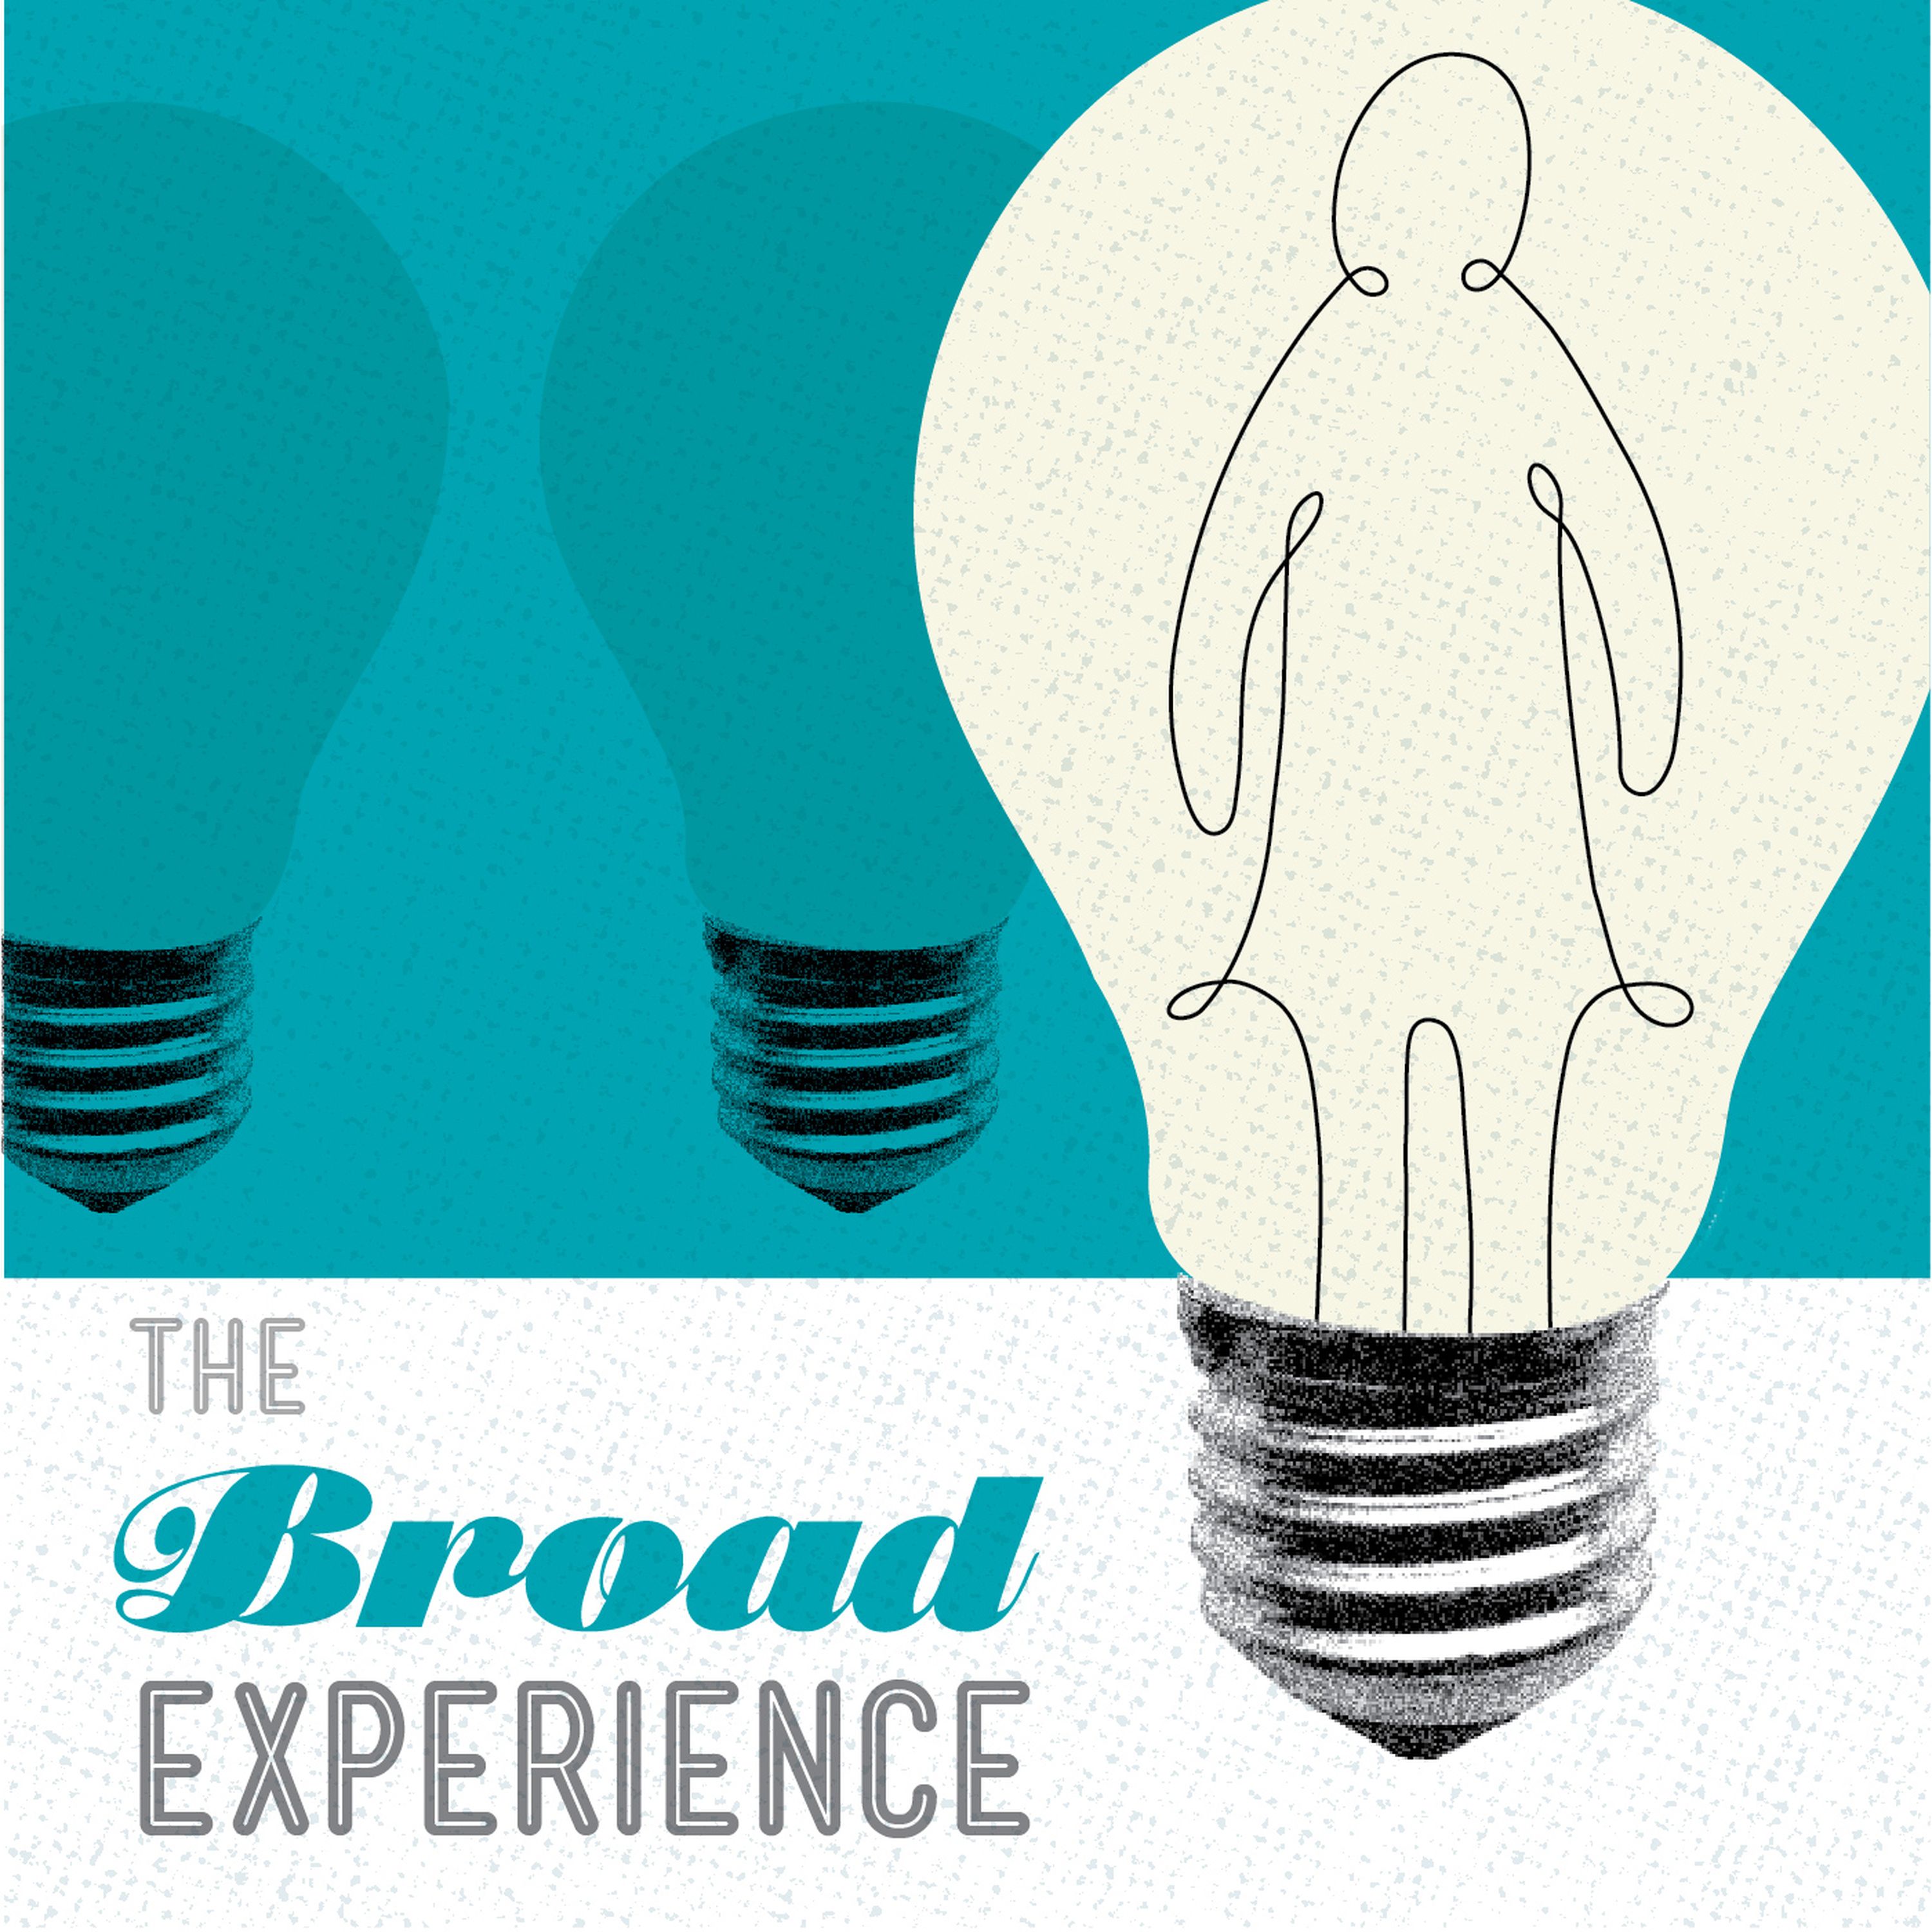 The Broad Experience 28: Claiming authority